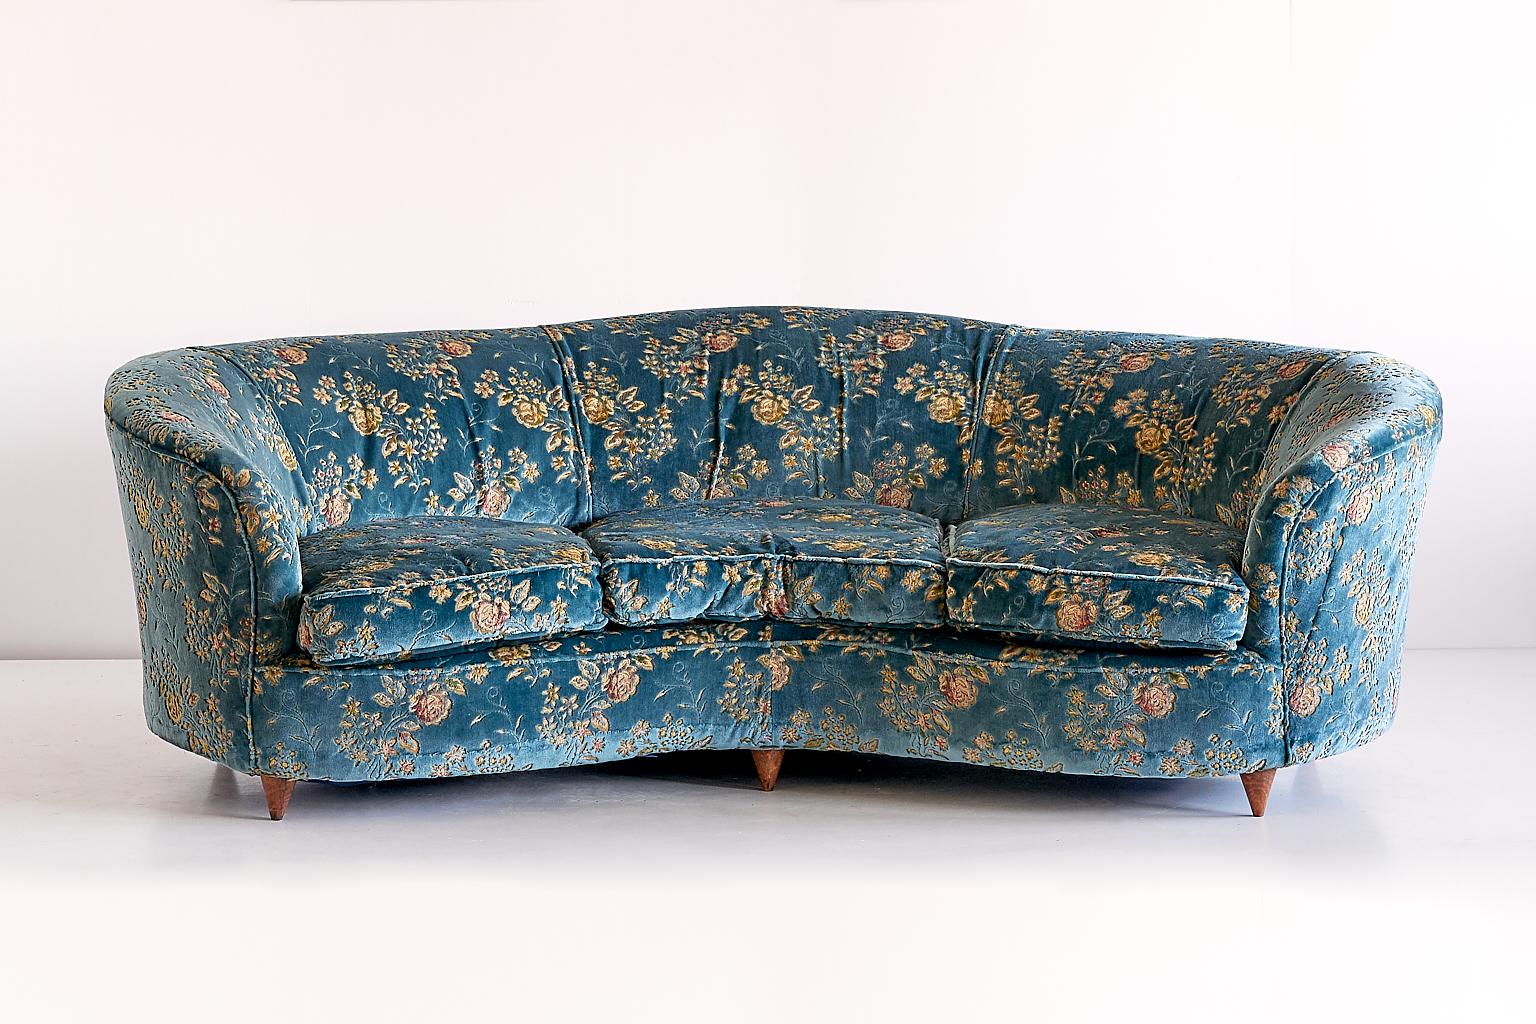 This sumptuous curved sofa was designed and manufactured in Italy in the late 1930s. The design is attributed to Gio Ponti, who has designed similar sofas for the manufacturer Casa e Giardino and the Hotel Bristol in Merano. This elegant sofa